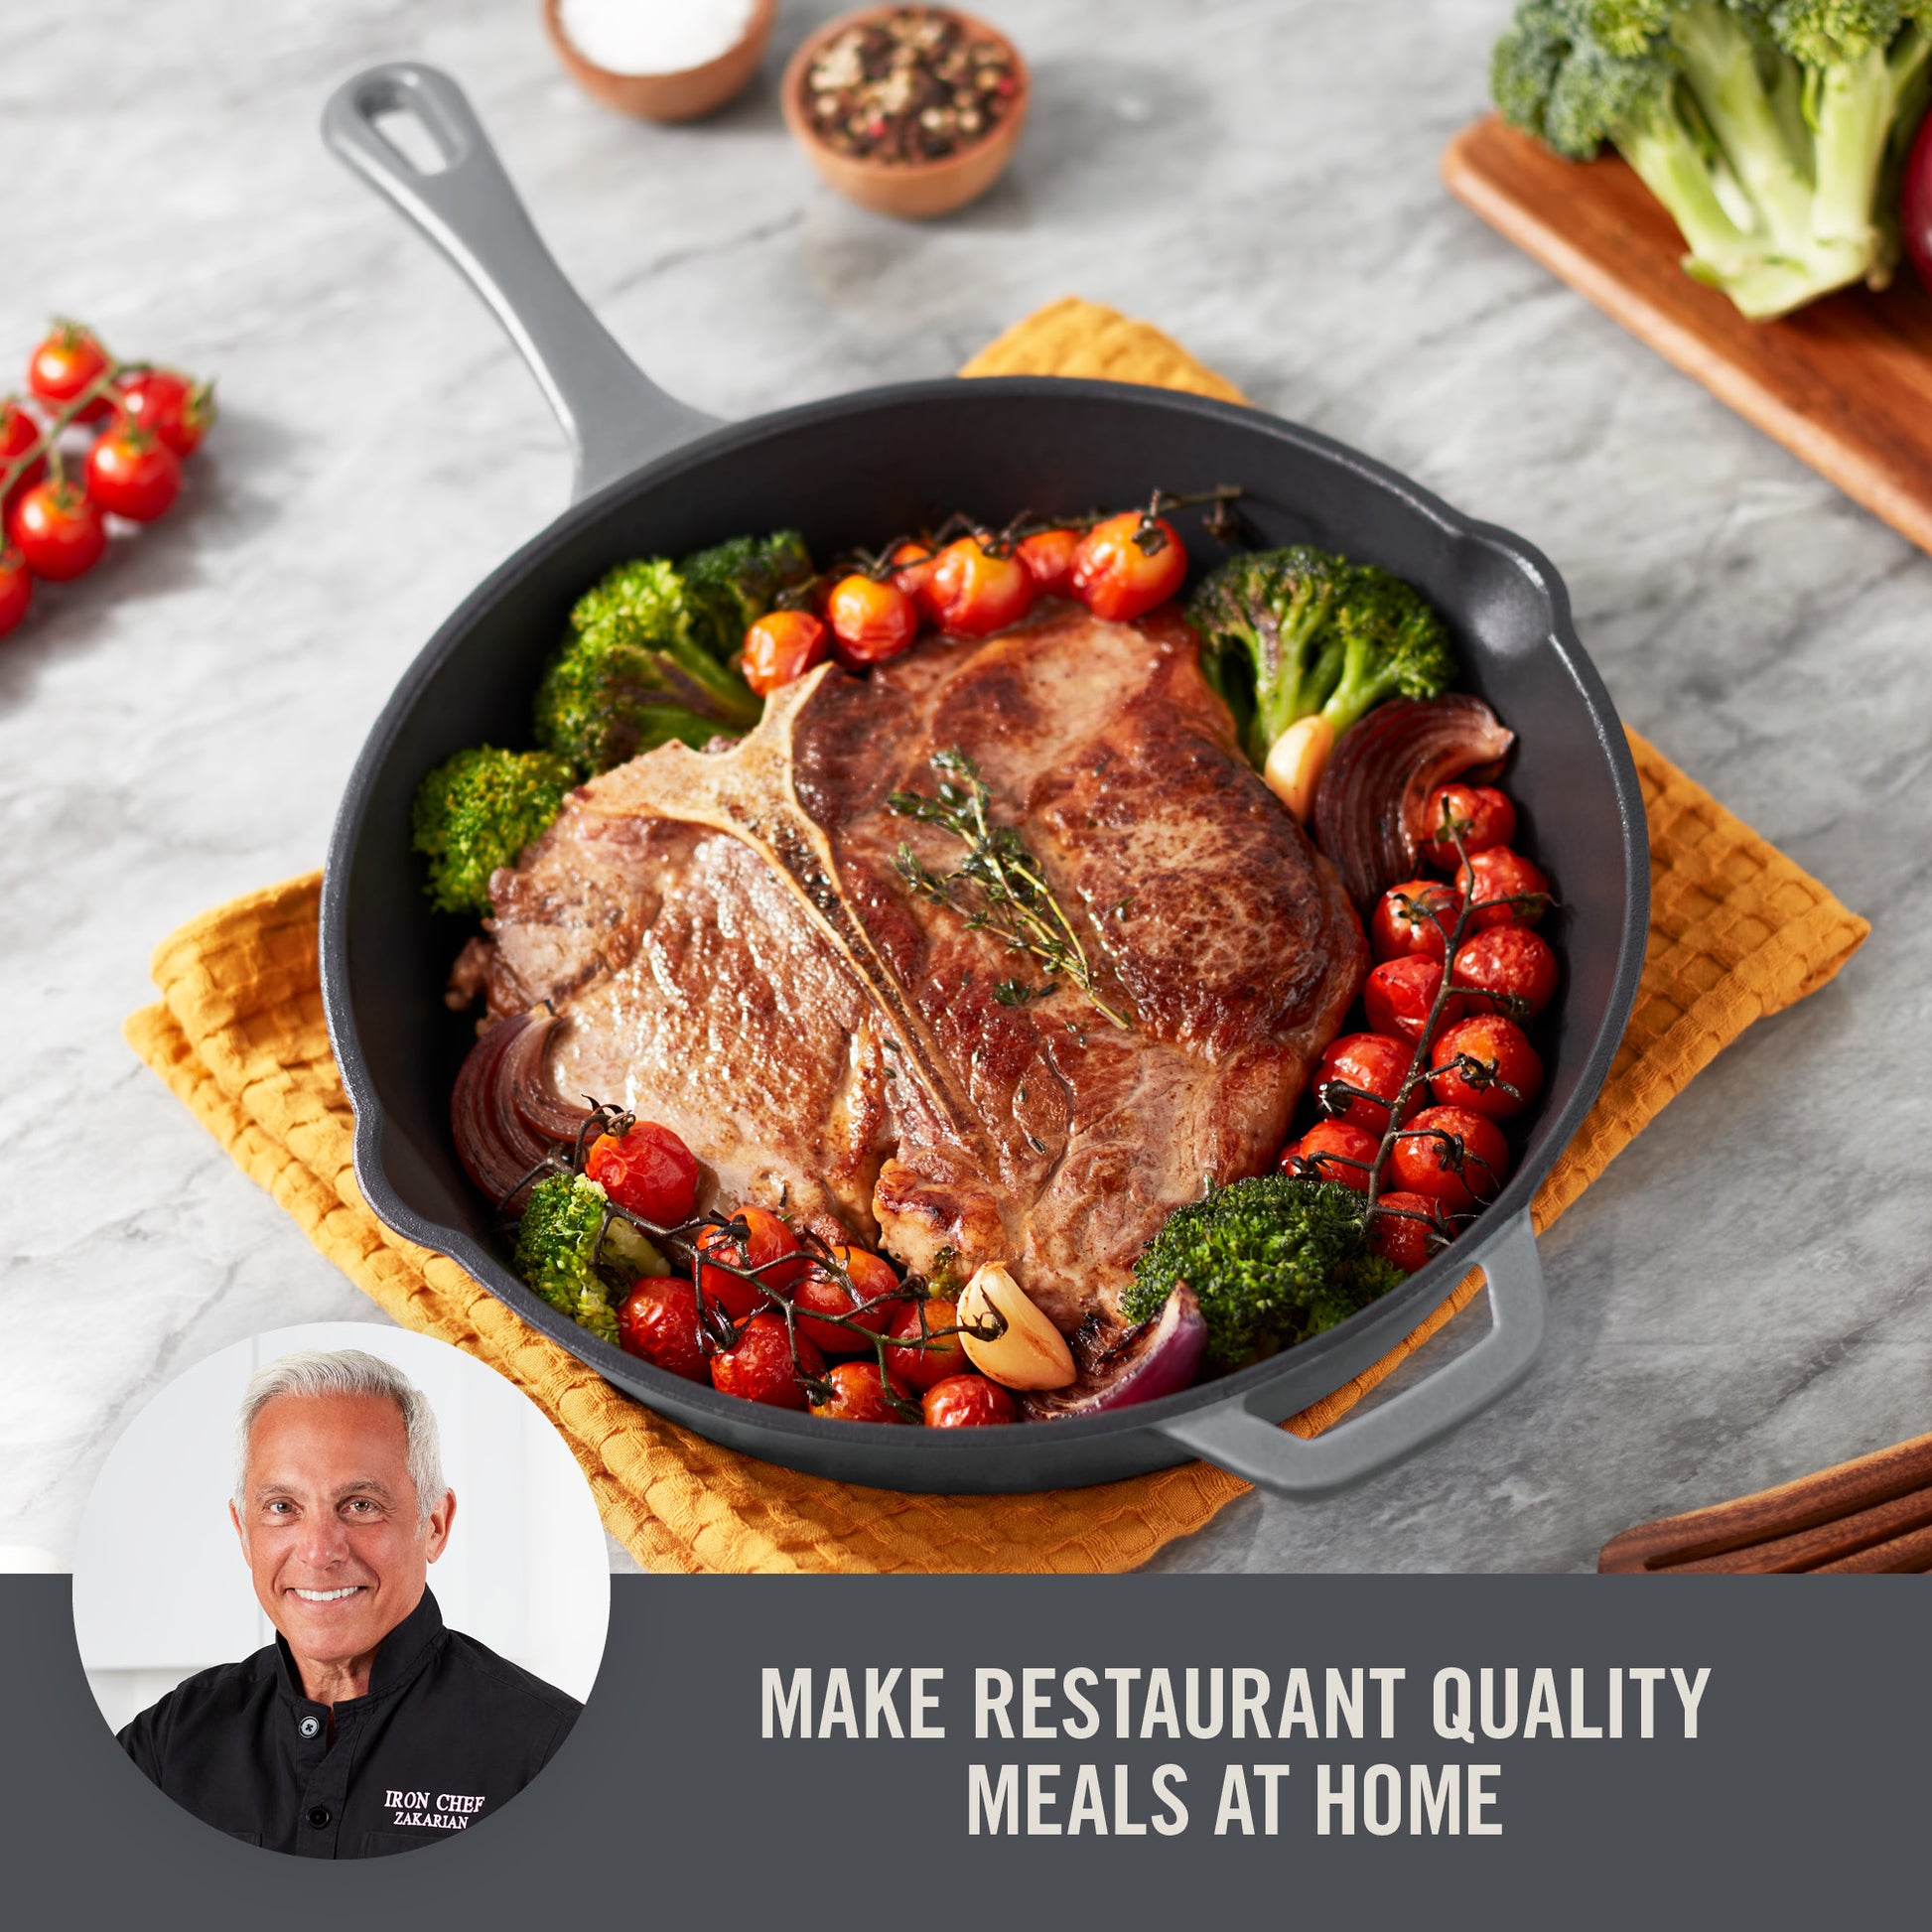 Geoffrey Zakarian - MY ZAKARIAN NON STICK CAST IRON COLLECTION IS BACK IN  LESS THAN 24 HOURS! I can't wait to be demoing live with the 10, 12 and  brand new to